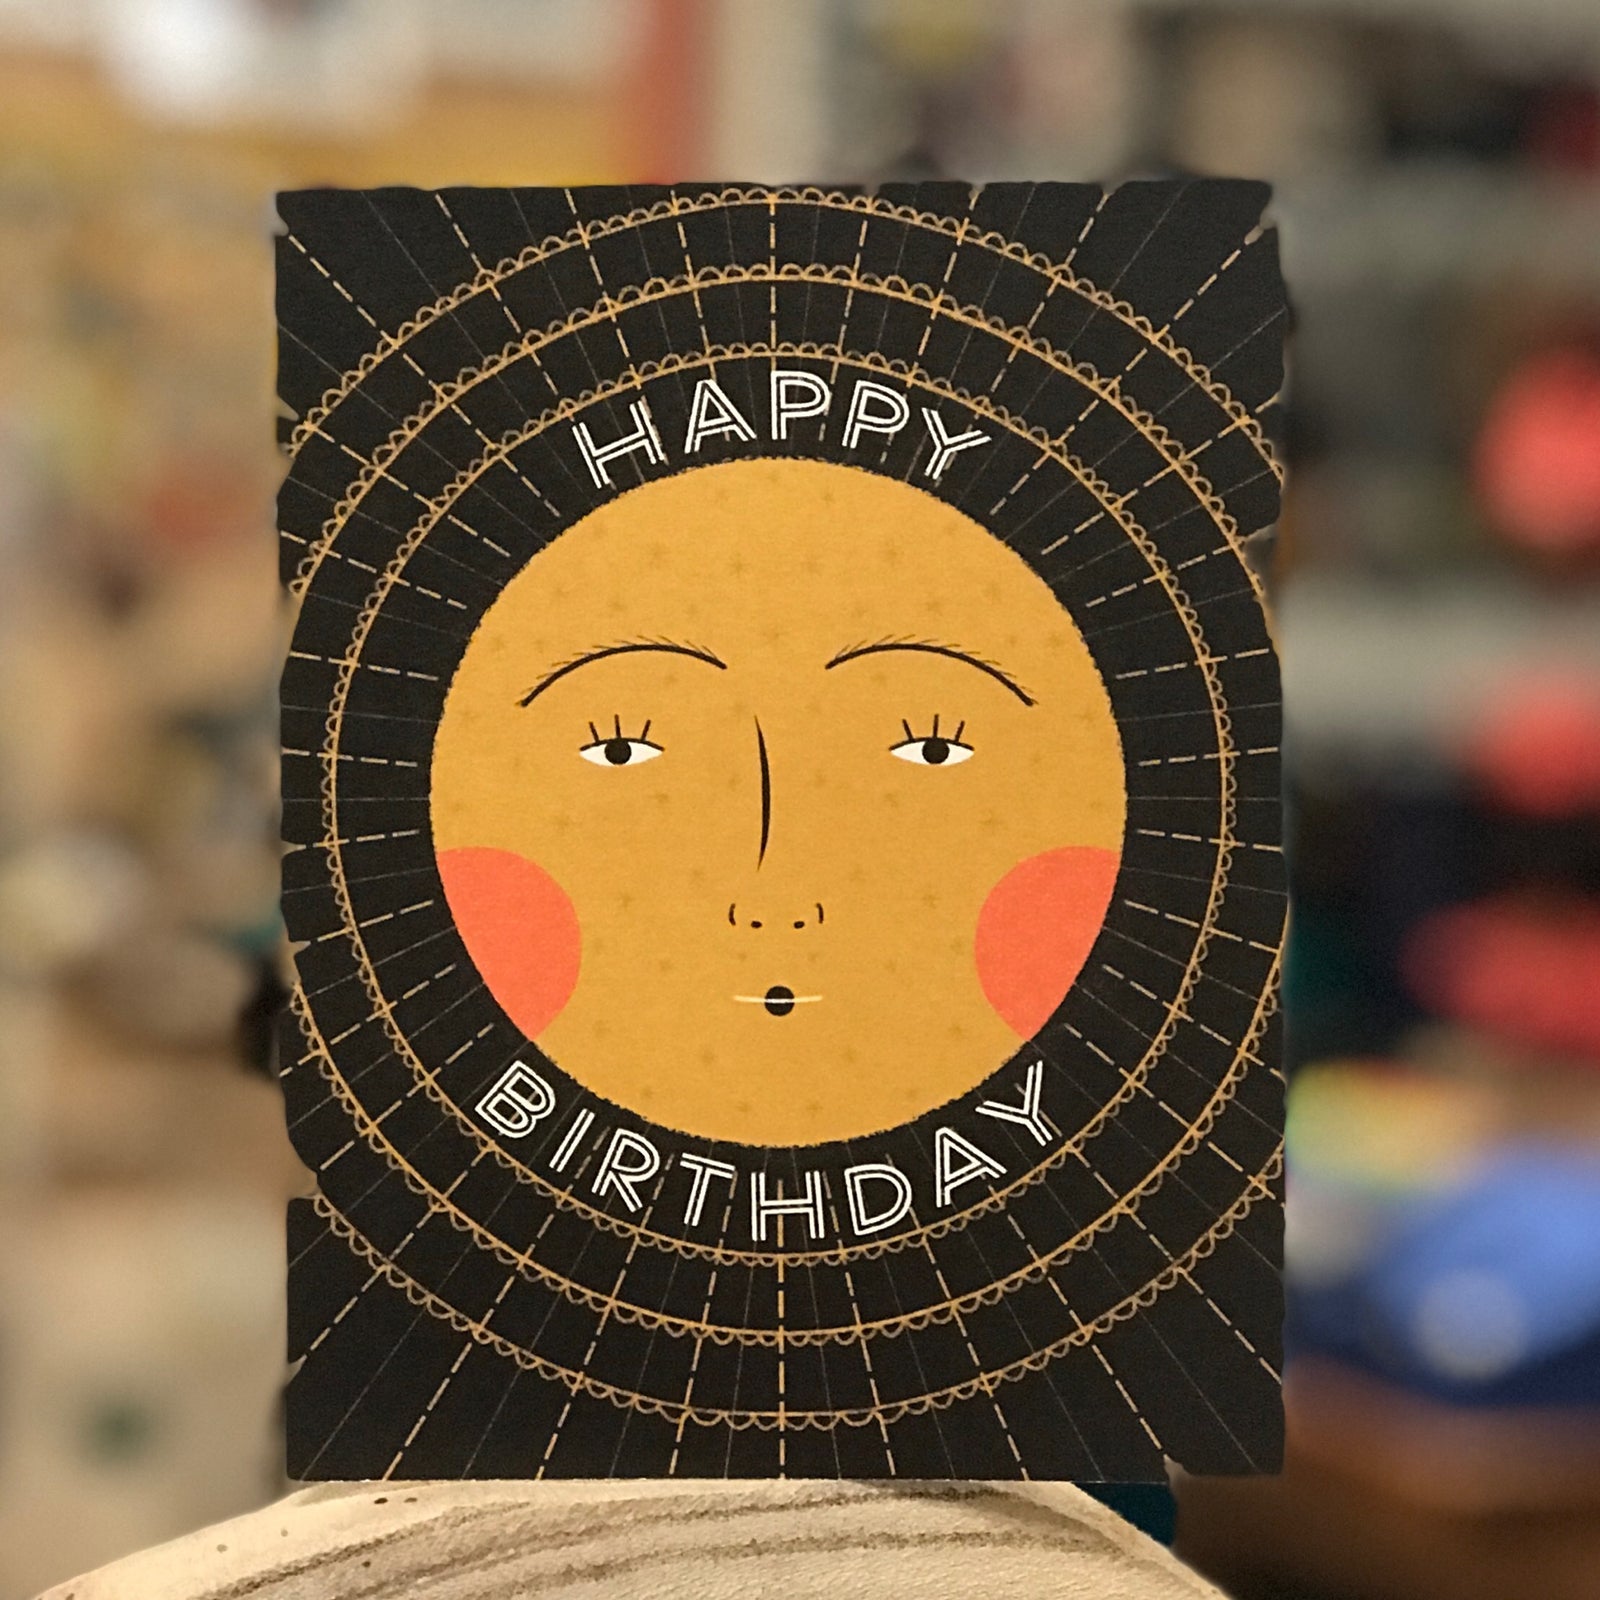 A black card with a mustard yellow sun with rosy cheeks in the middle. It says "Happy Birthday." The sun haas a pretty face. The card is sitting atop a piece of wood and the background of the photo is blurry. 